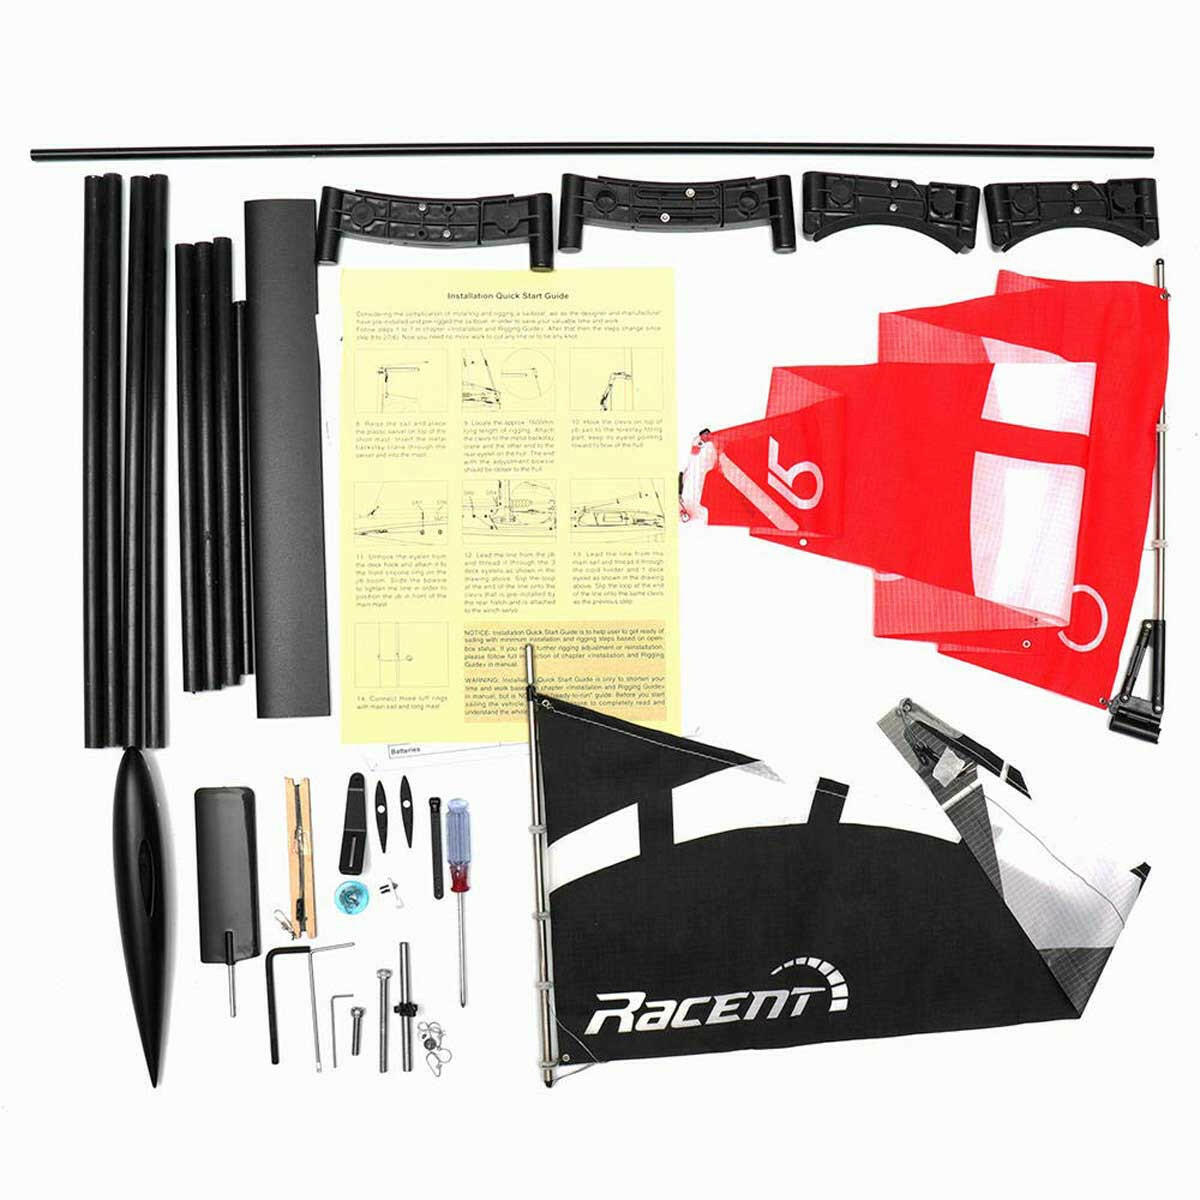 Compass 2 Channel 650mm Wind Power Sailboat for RG65 Class Competition (791-1) RTR - EXHOBBY